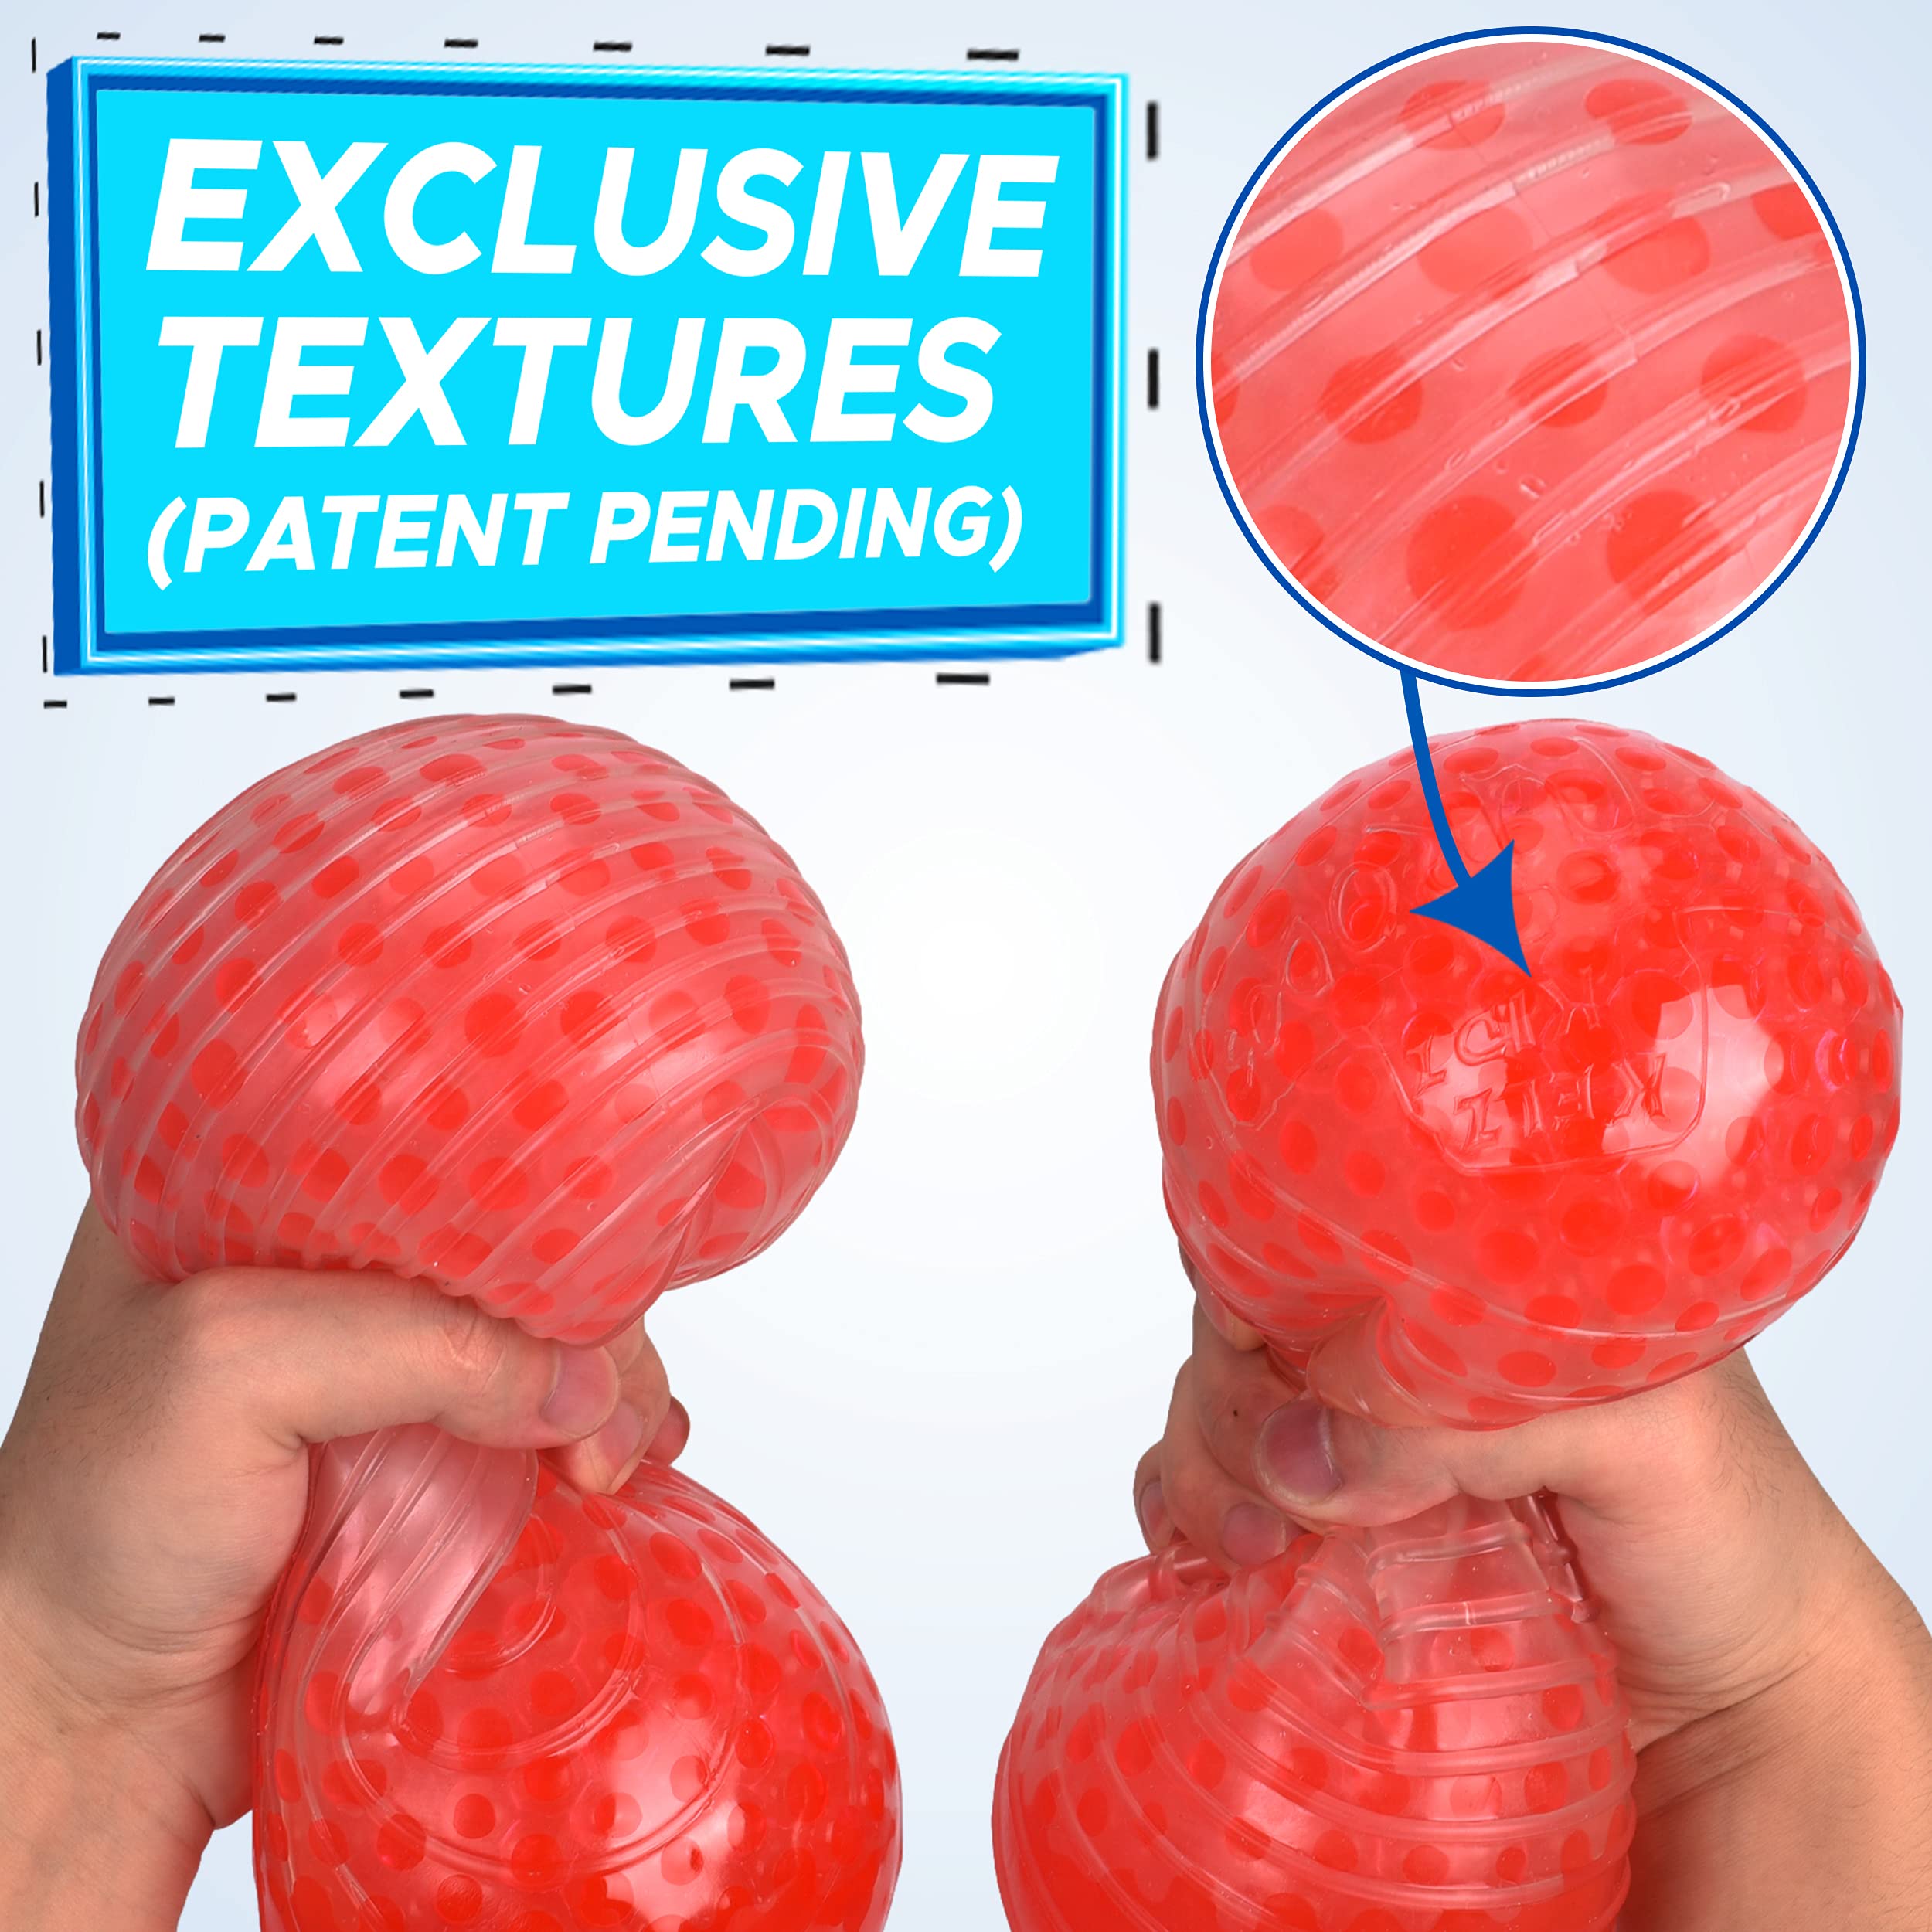 KELZ KIDZ® TEXTURODOS® Giant Satisfying and Fun Jumbo Textured Stress Ball for Kids and Adults with Therapy and Sensory Needs (Red Beads)